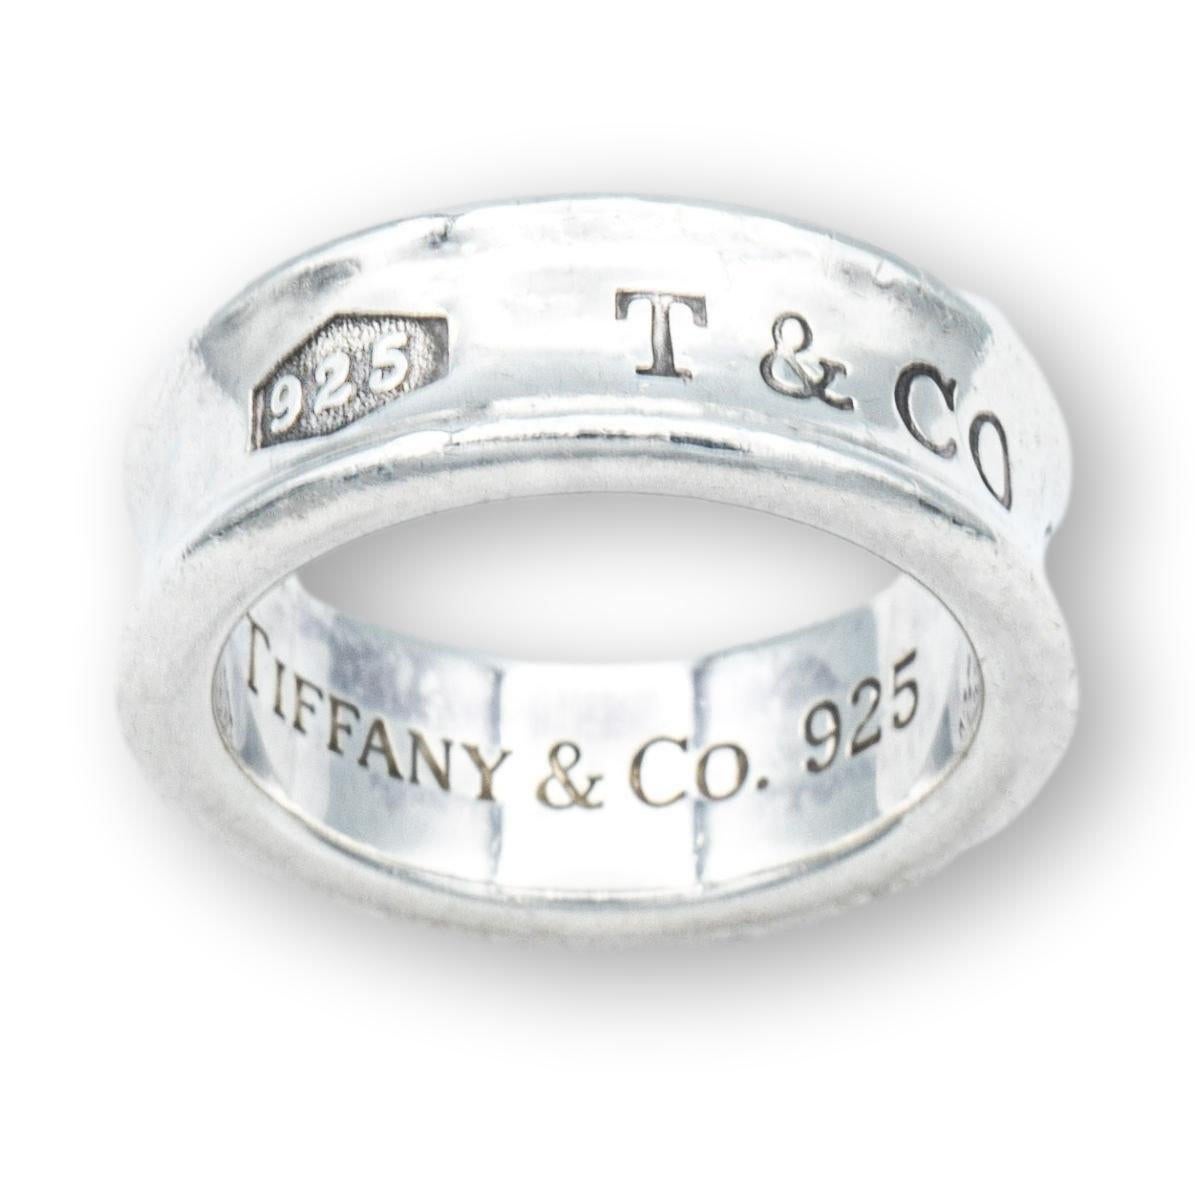 Vintage Tiffany & Co. band ring from the 1837 collection finely crafted in fine sterling silver with a contour design measuring 7mm wide. Ring is fully hallmarked.

Ring Specifications

Brand/Collection: Tiffany & Co. 1837
Hallmarks: 925 T & CO.